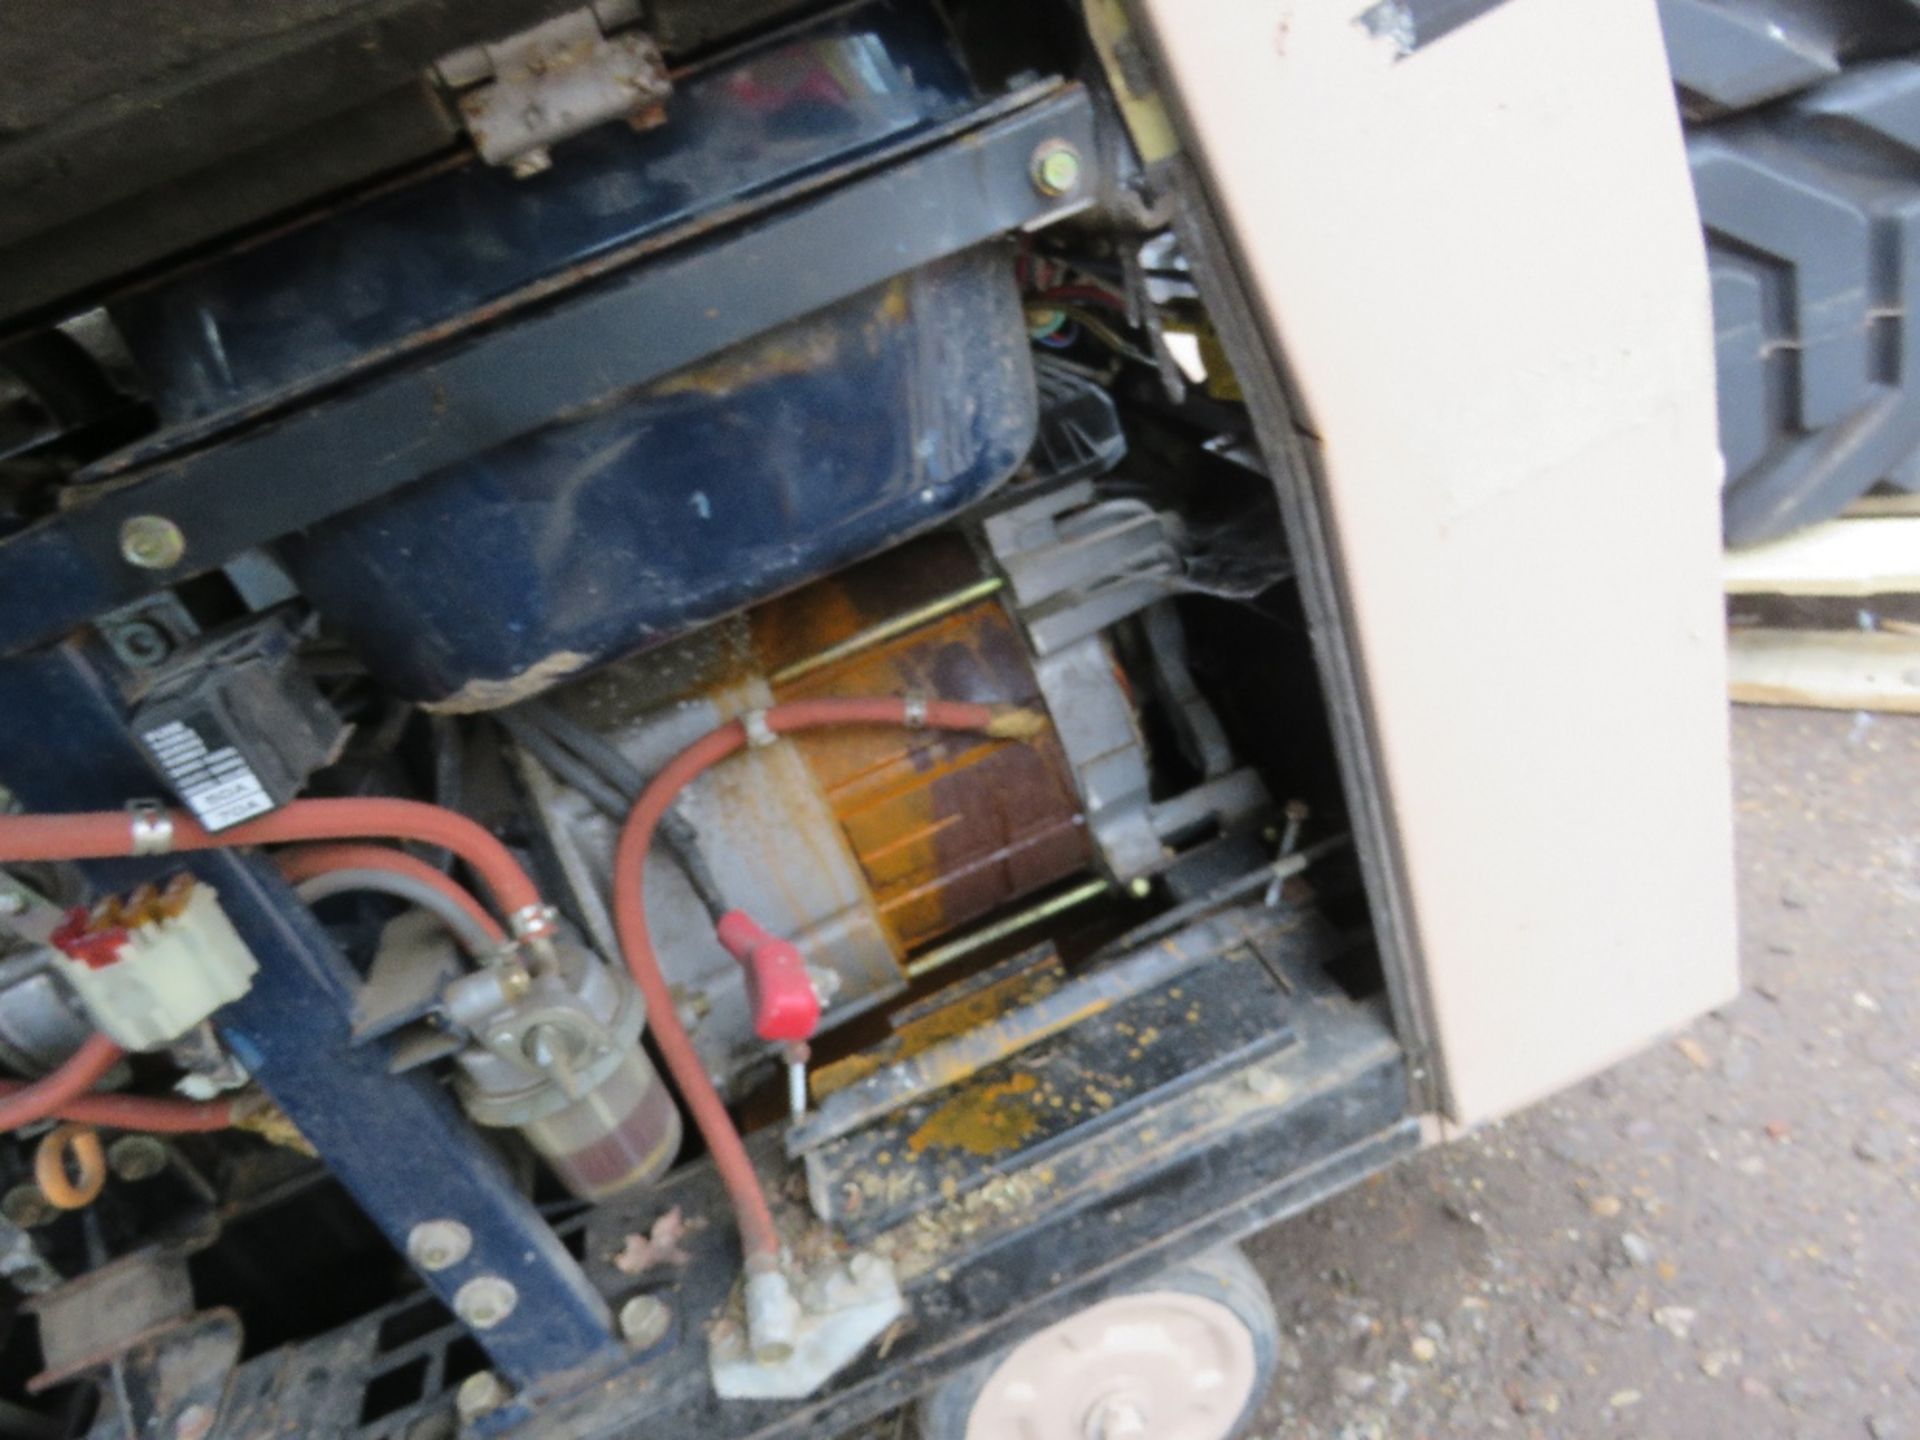 HONDA EX10D WHEELED 10KVA GENERATOR. SPARES/REPAIR AS APPEARS INCOMPLETE, SEE IMAGES. - Image 5 of 5